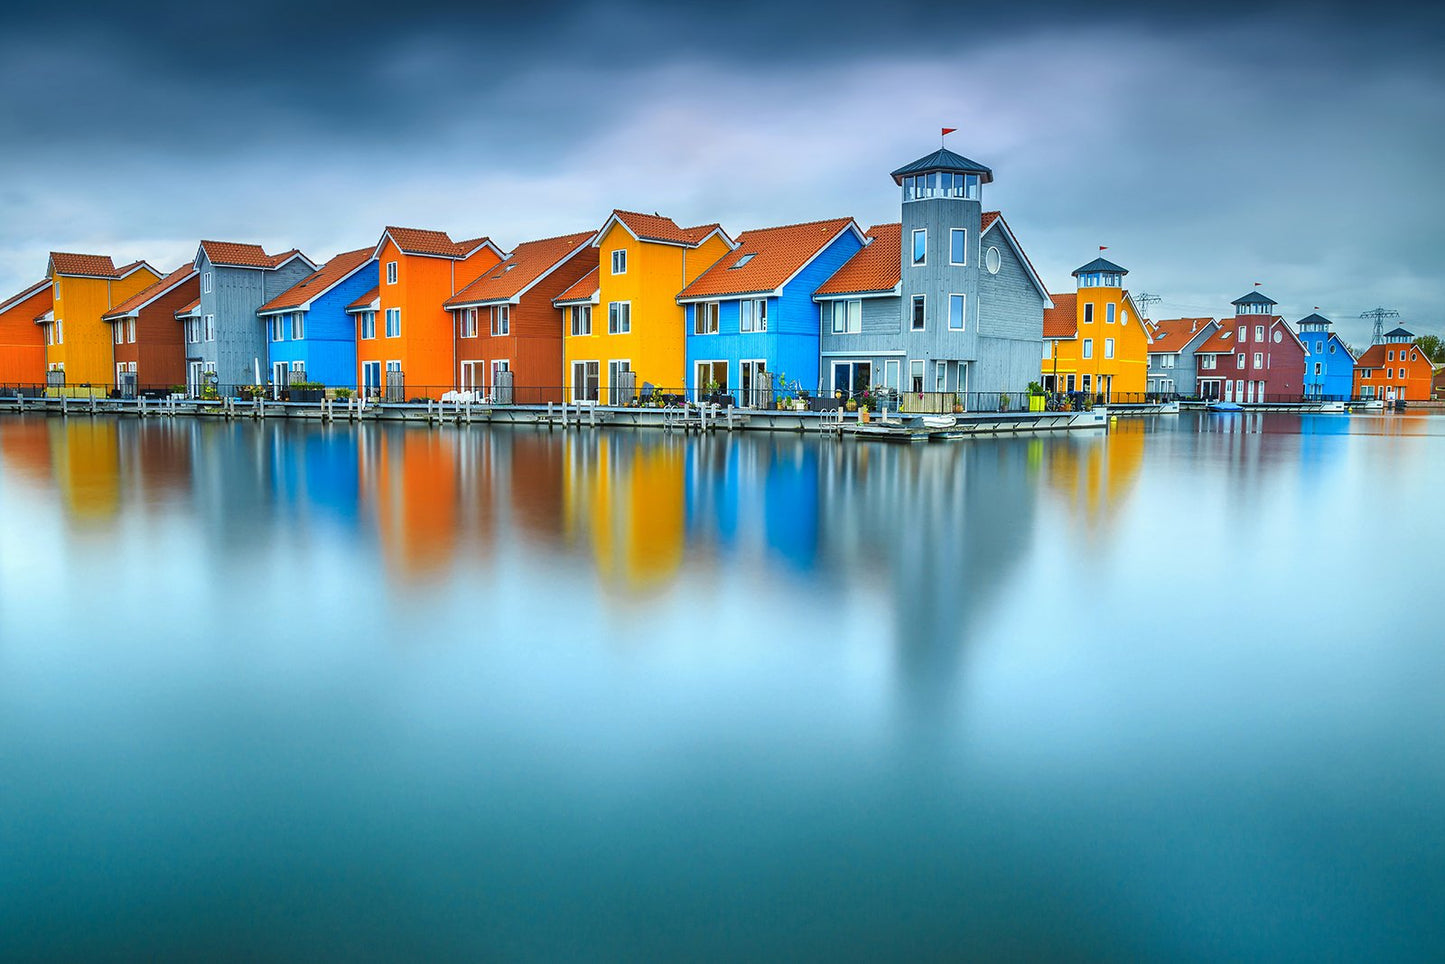 Blue Morning at Waters Edge Groningen Netherlands Europe Landscape Wall Art Canvas Prints  - PIPAFINEART